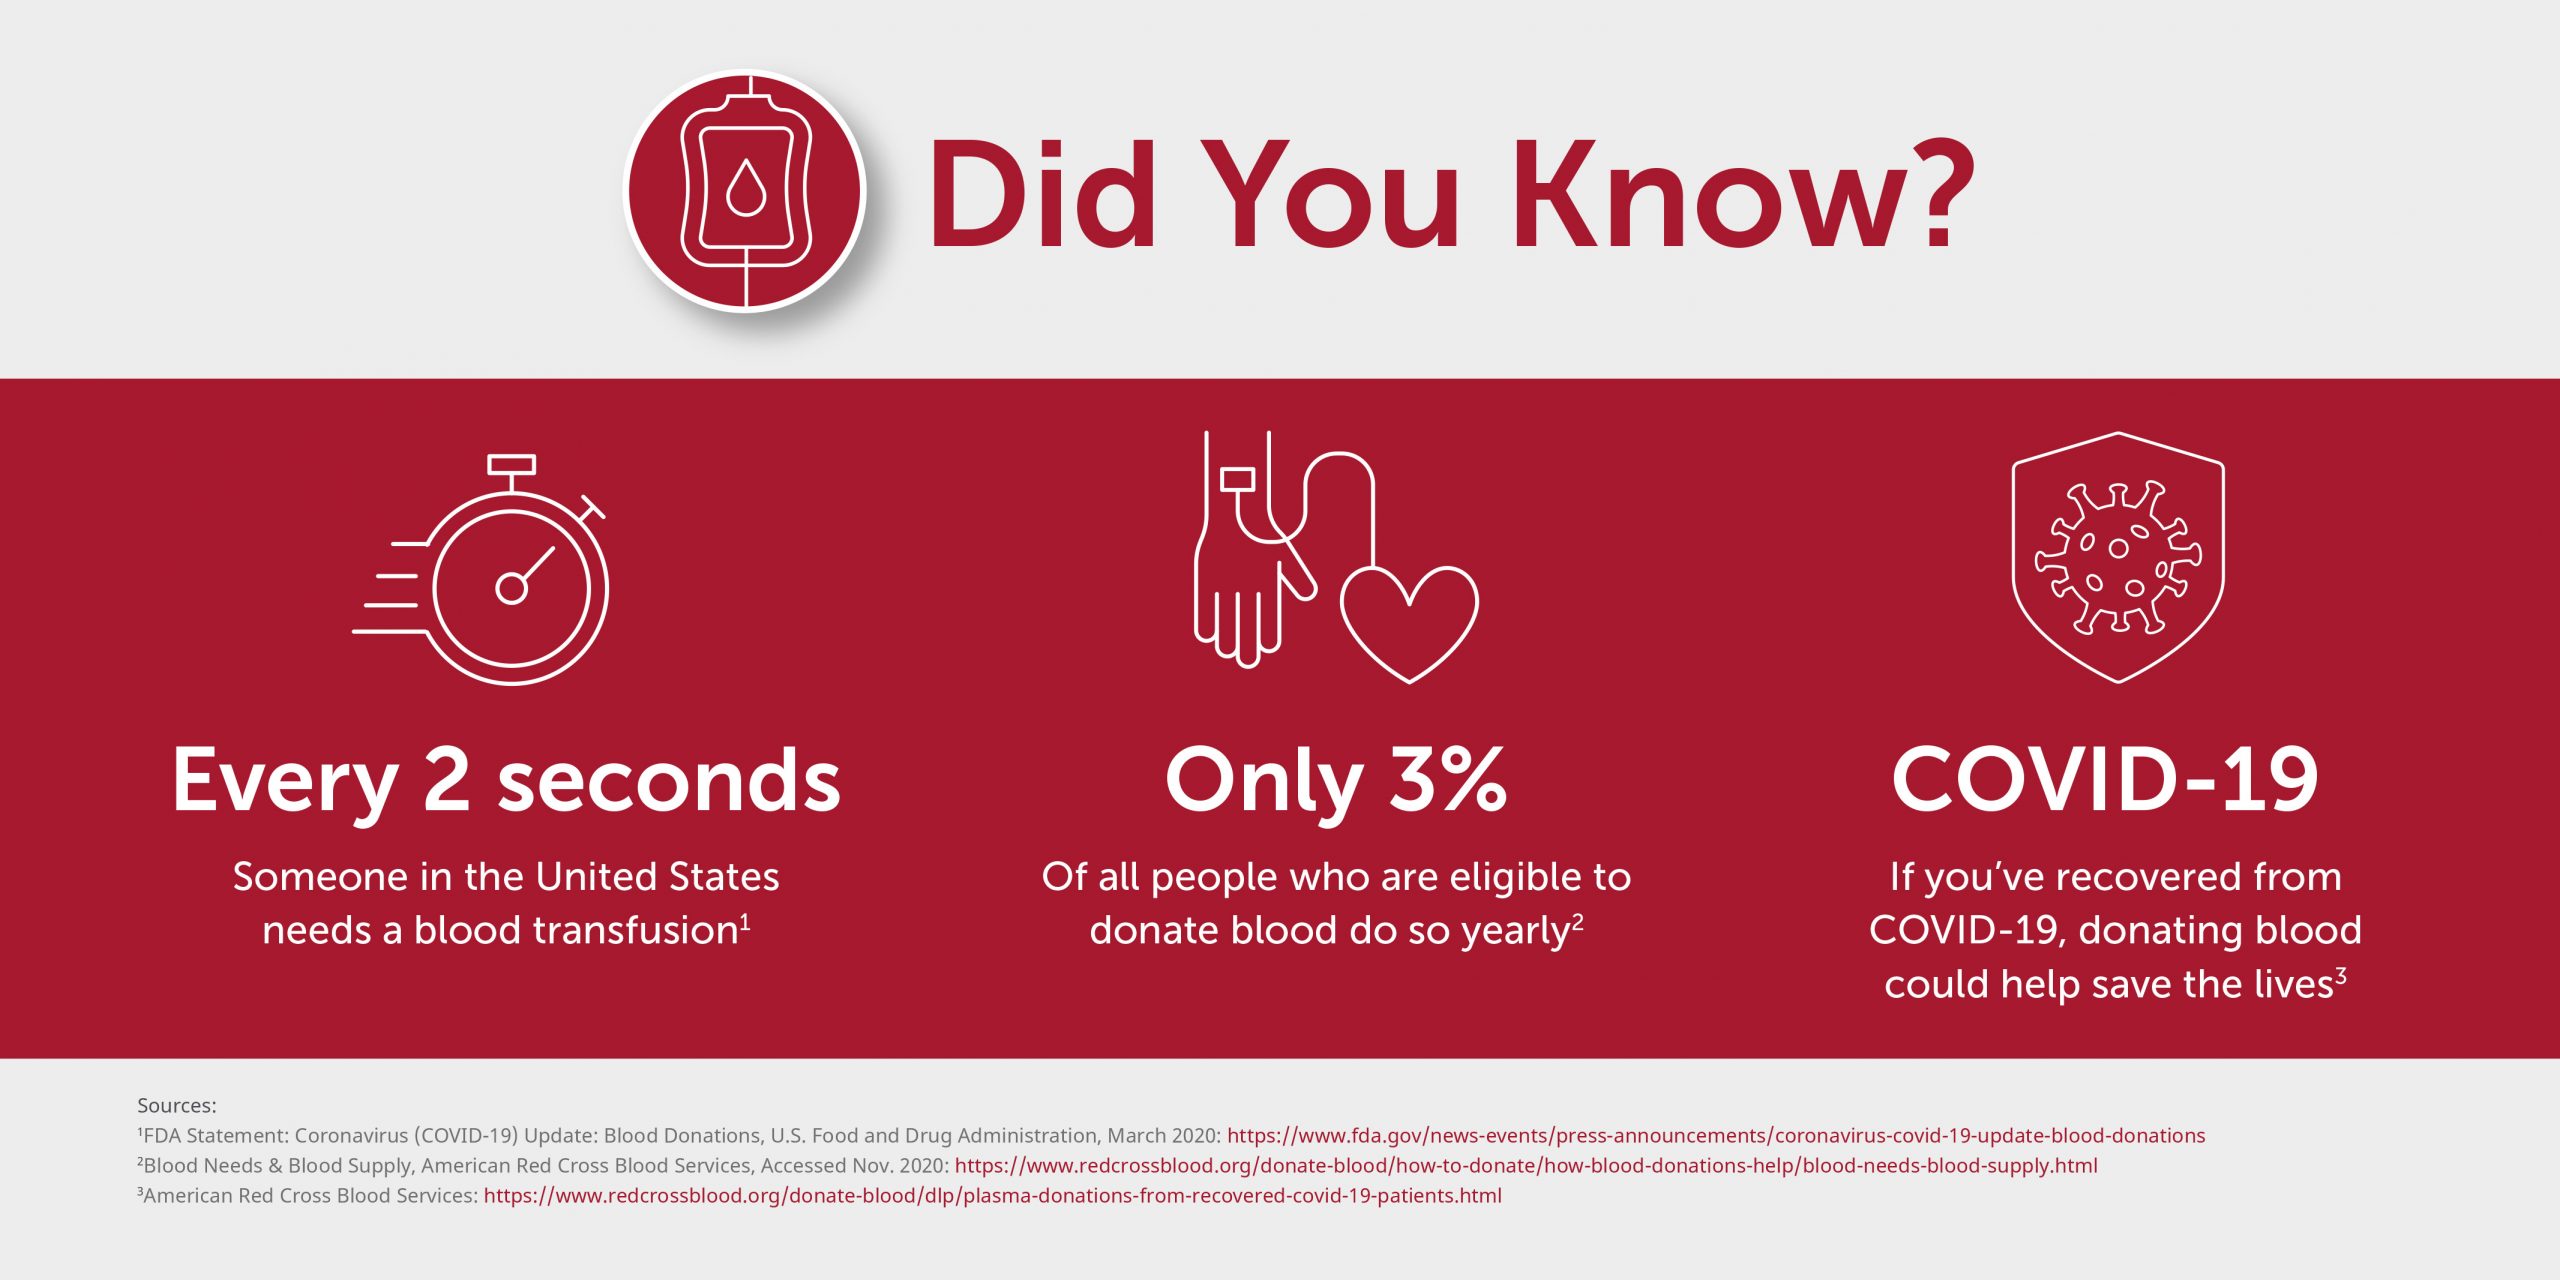 red cross weight limits for giving blood